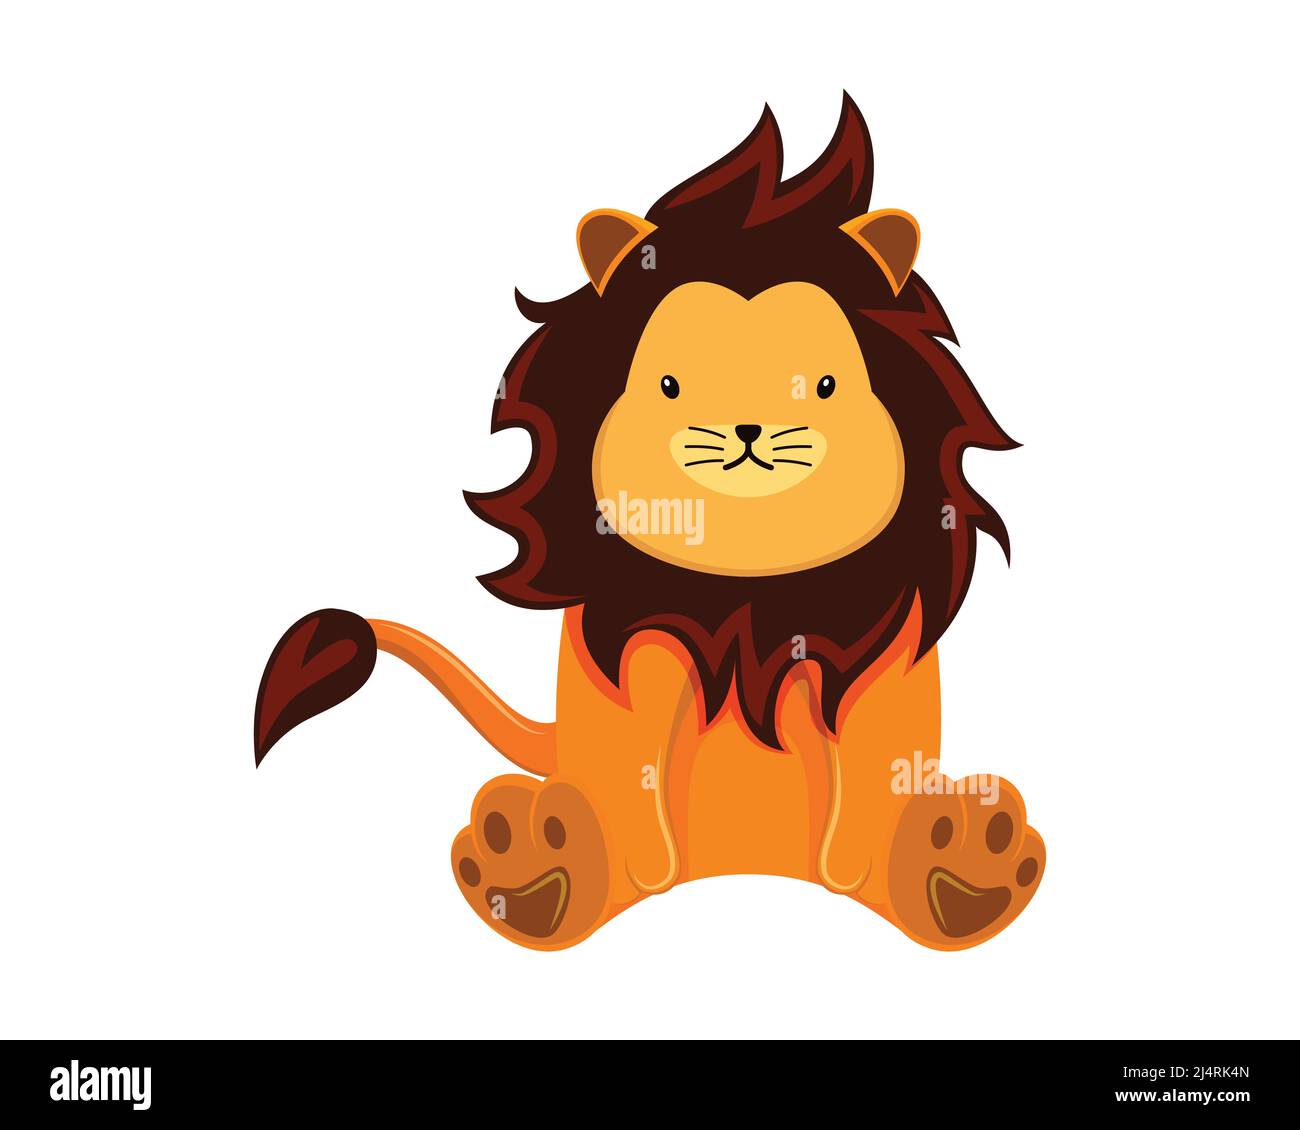 Cute and Sweet Lion Illustration with Cartoon Style Vector Stock Vector ...